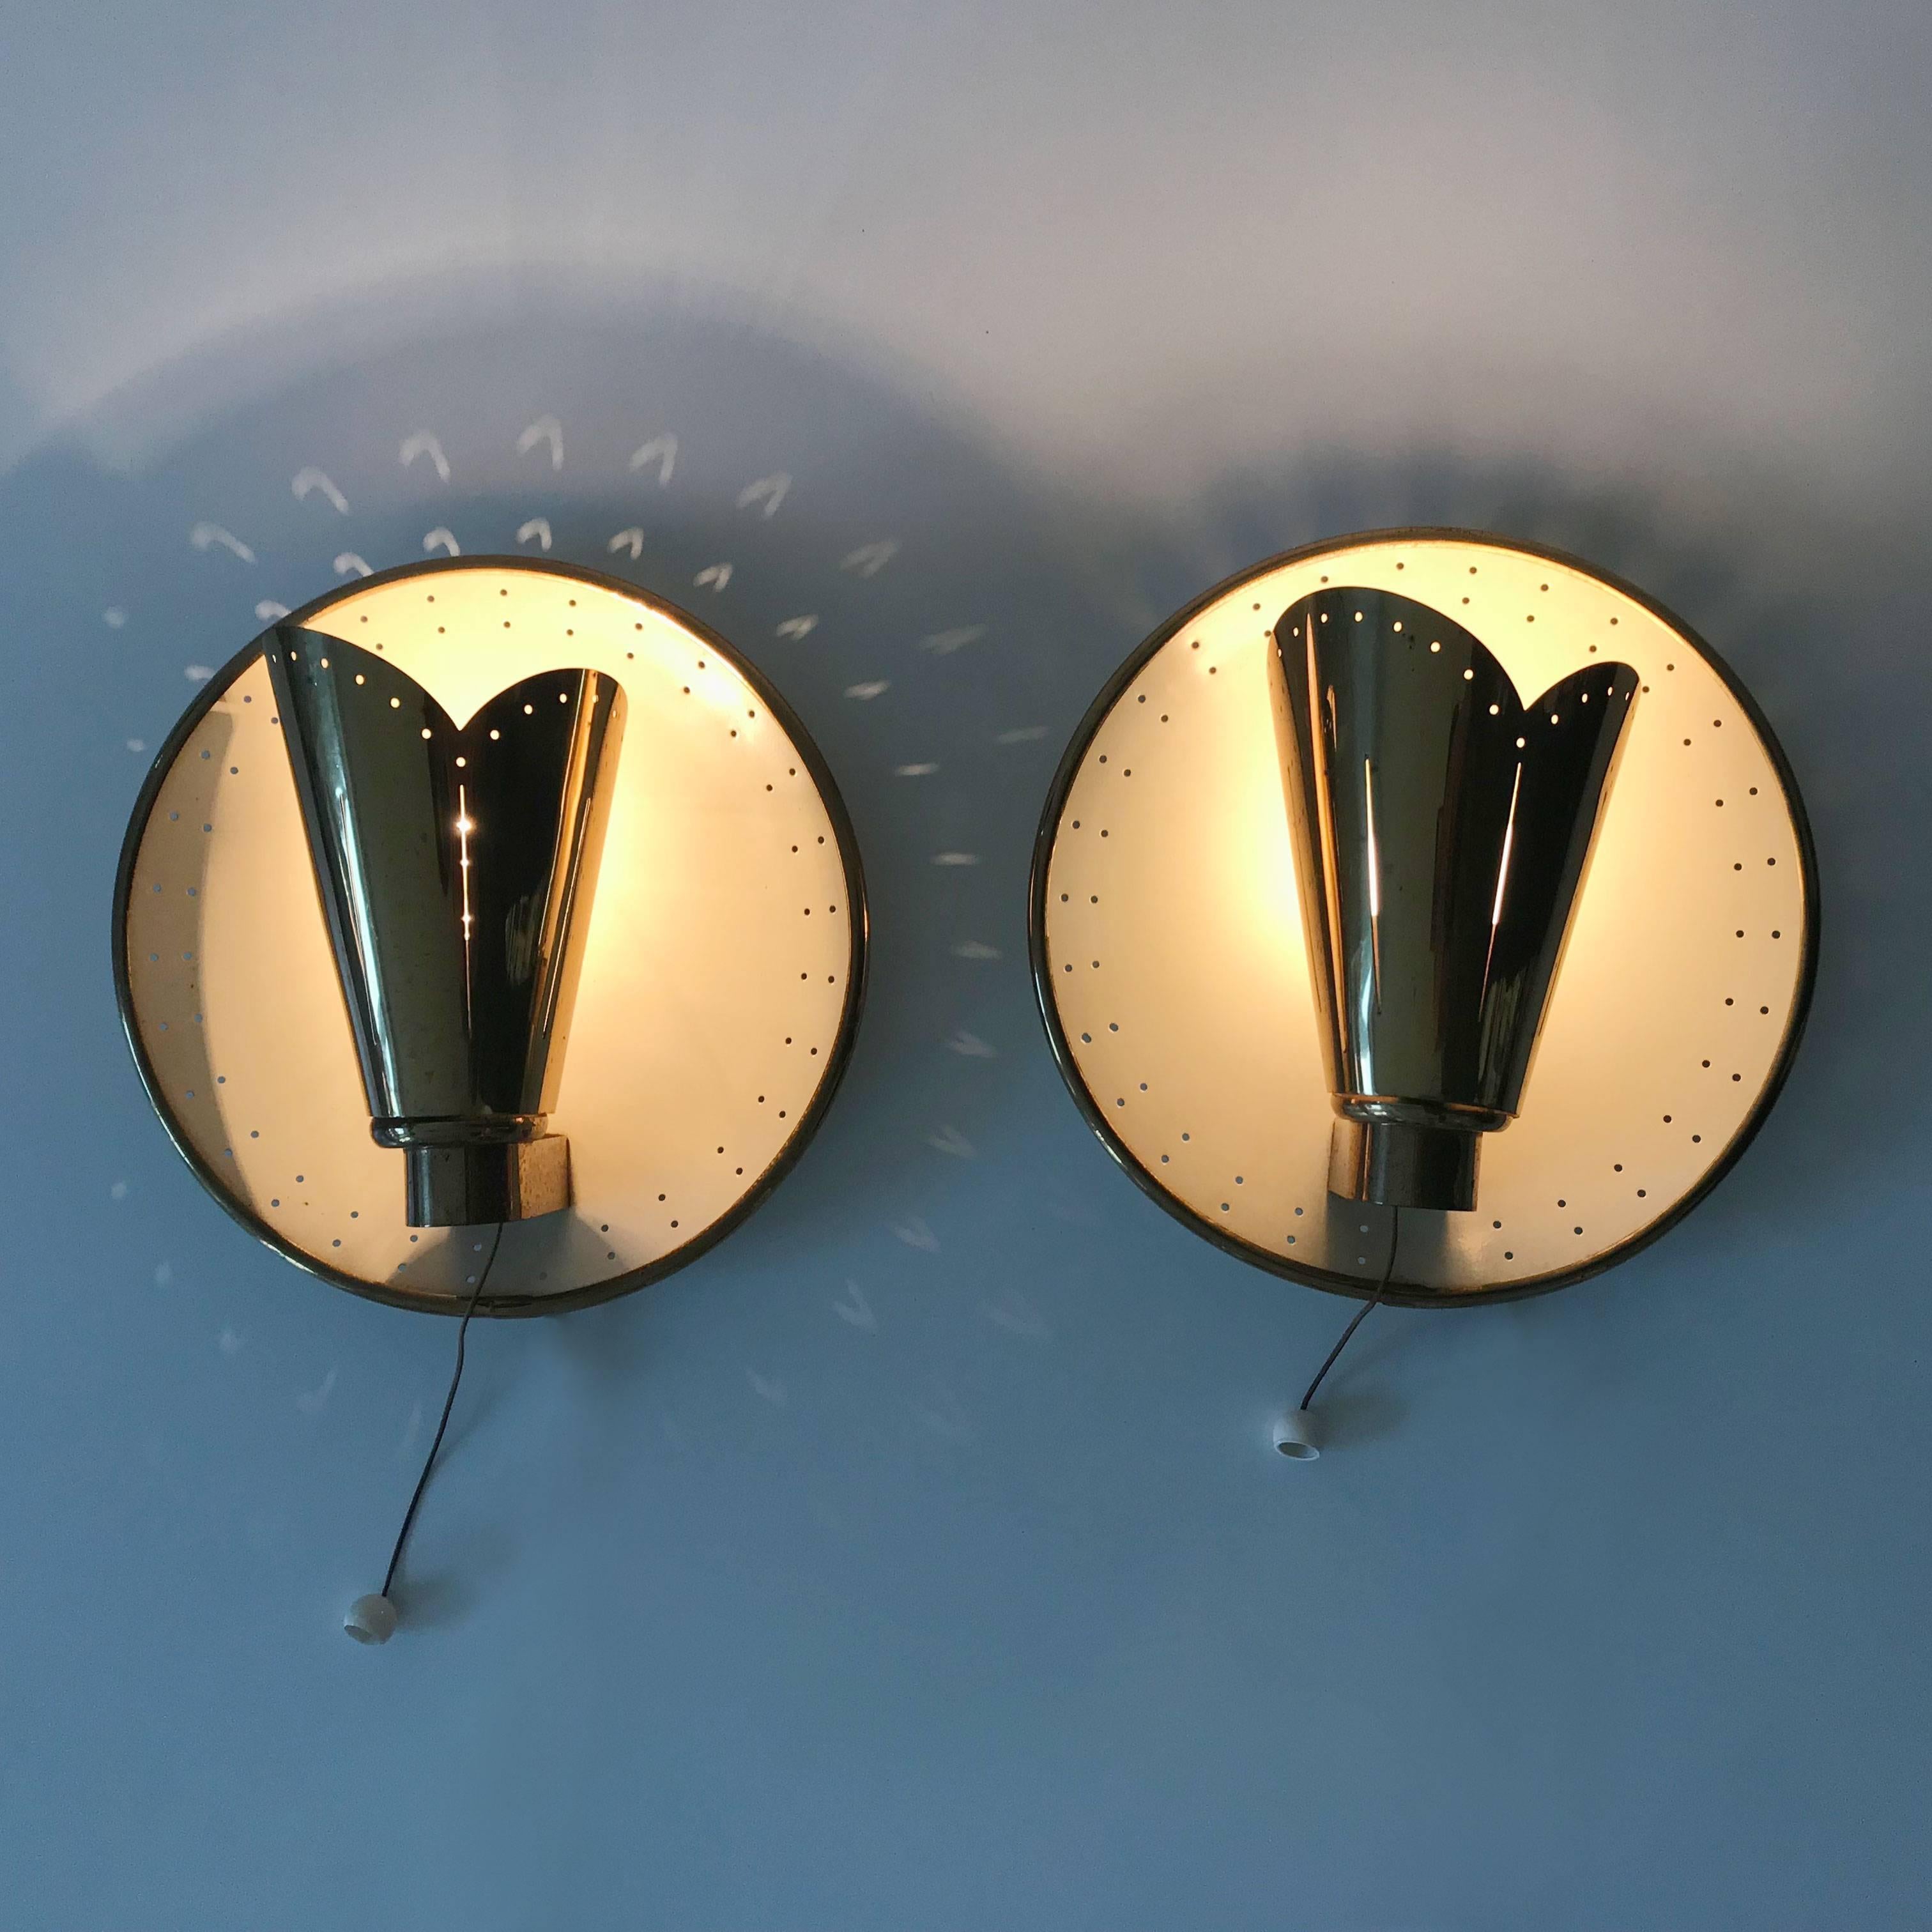 Exceptional set of two elegant Mid Century Modfern sconces or wall lamps. Designed probably by Jacques Biny, France, 1950s. 

Executed in metal and brass, each lamp needs 1 x E27 / E26 Edison screw fit bulb. They are wired, in working condition and